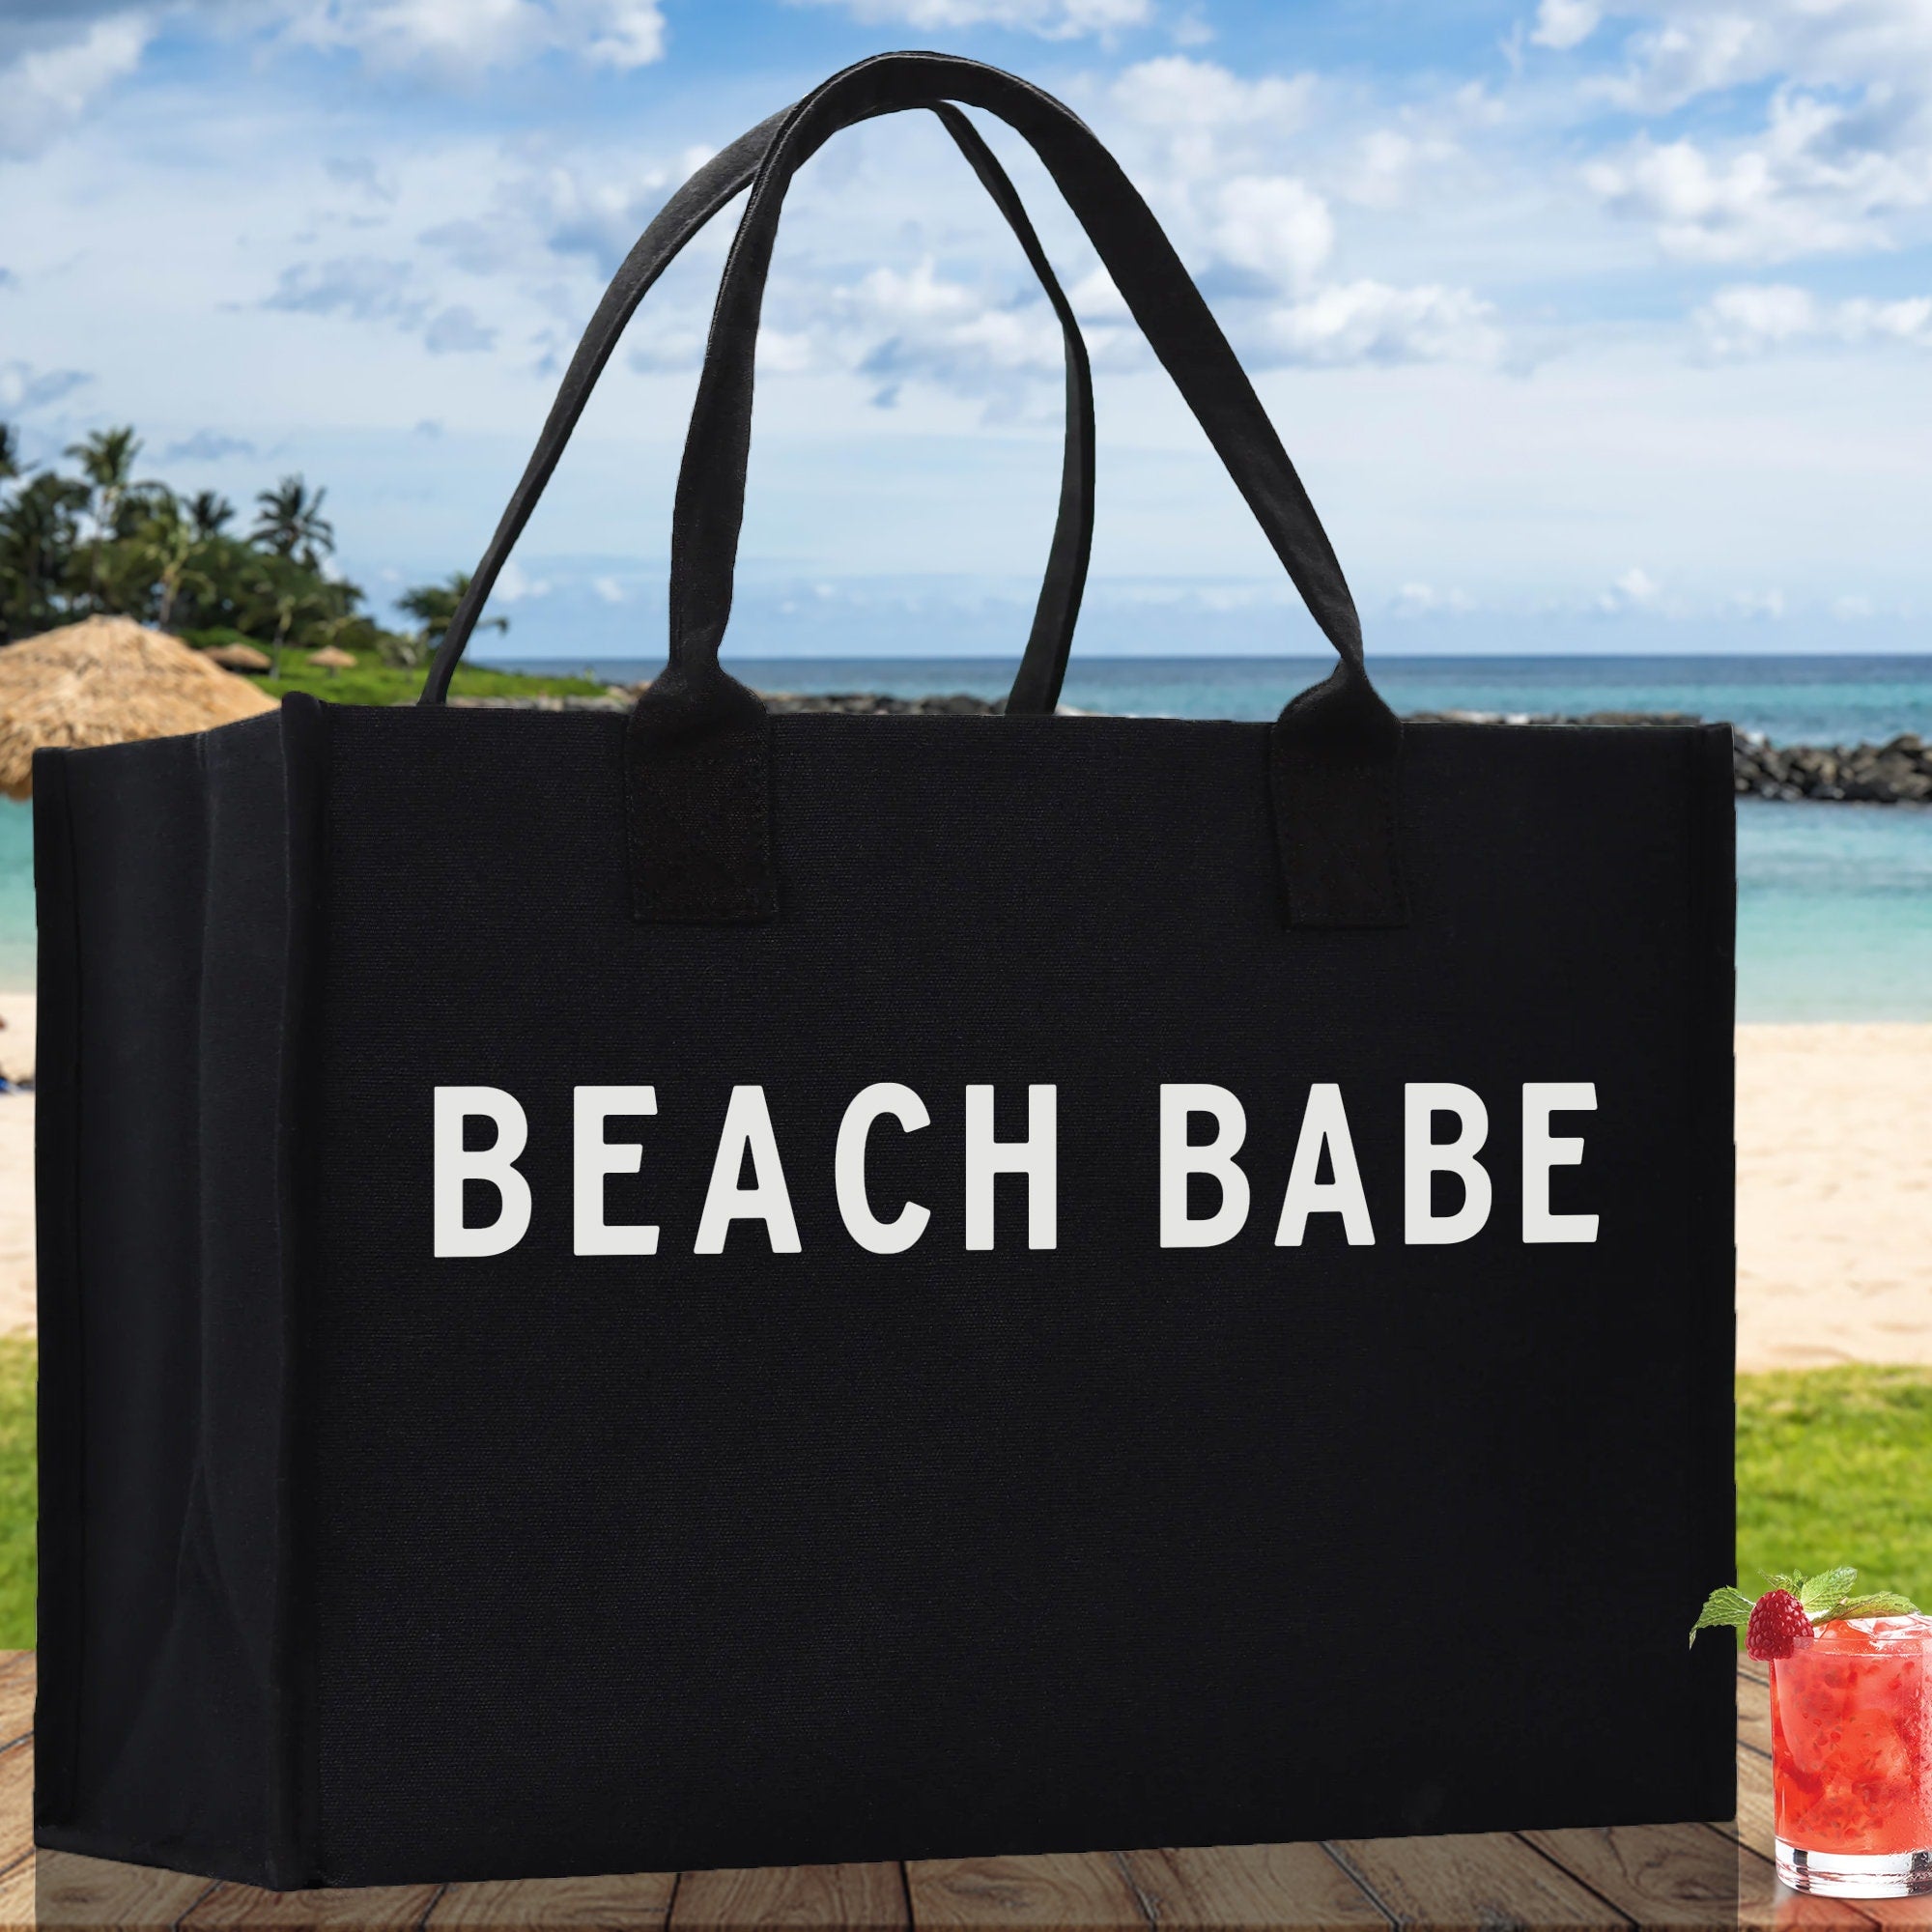 Beach Babe Cotton Canvas Chic Beach Tote Bag Multipurpose Tote Weekender Tote Gift for Her Outdoor Tote Vacation Tote Large Beach Bag